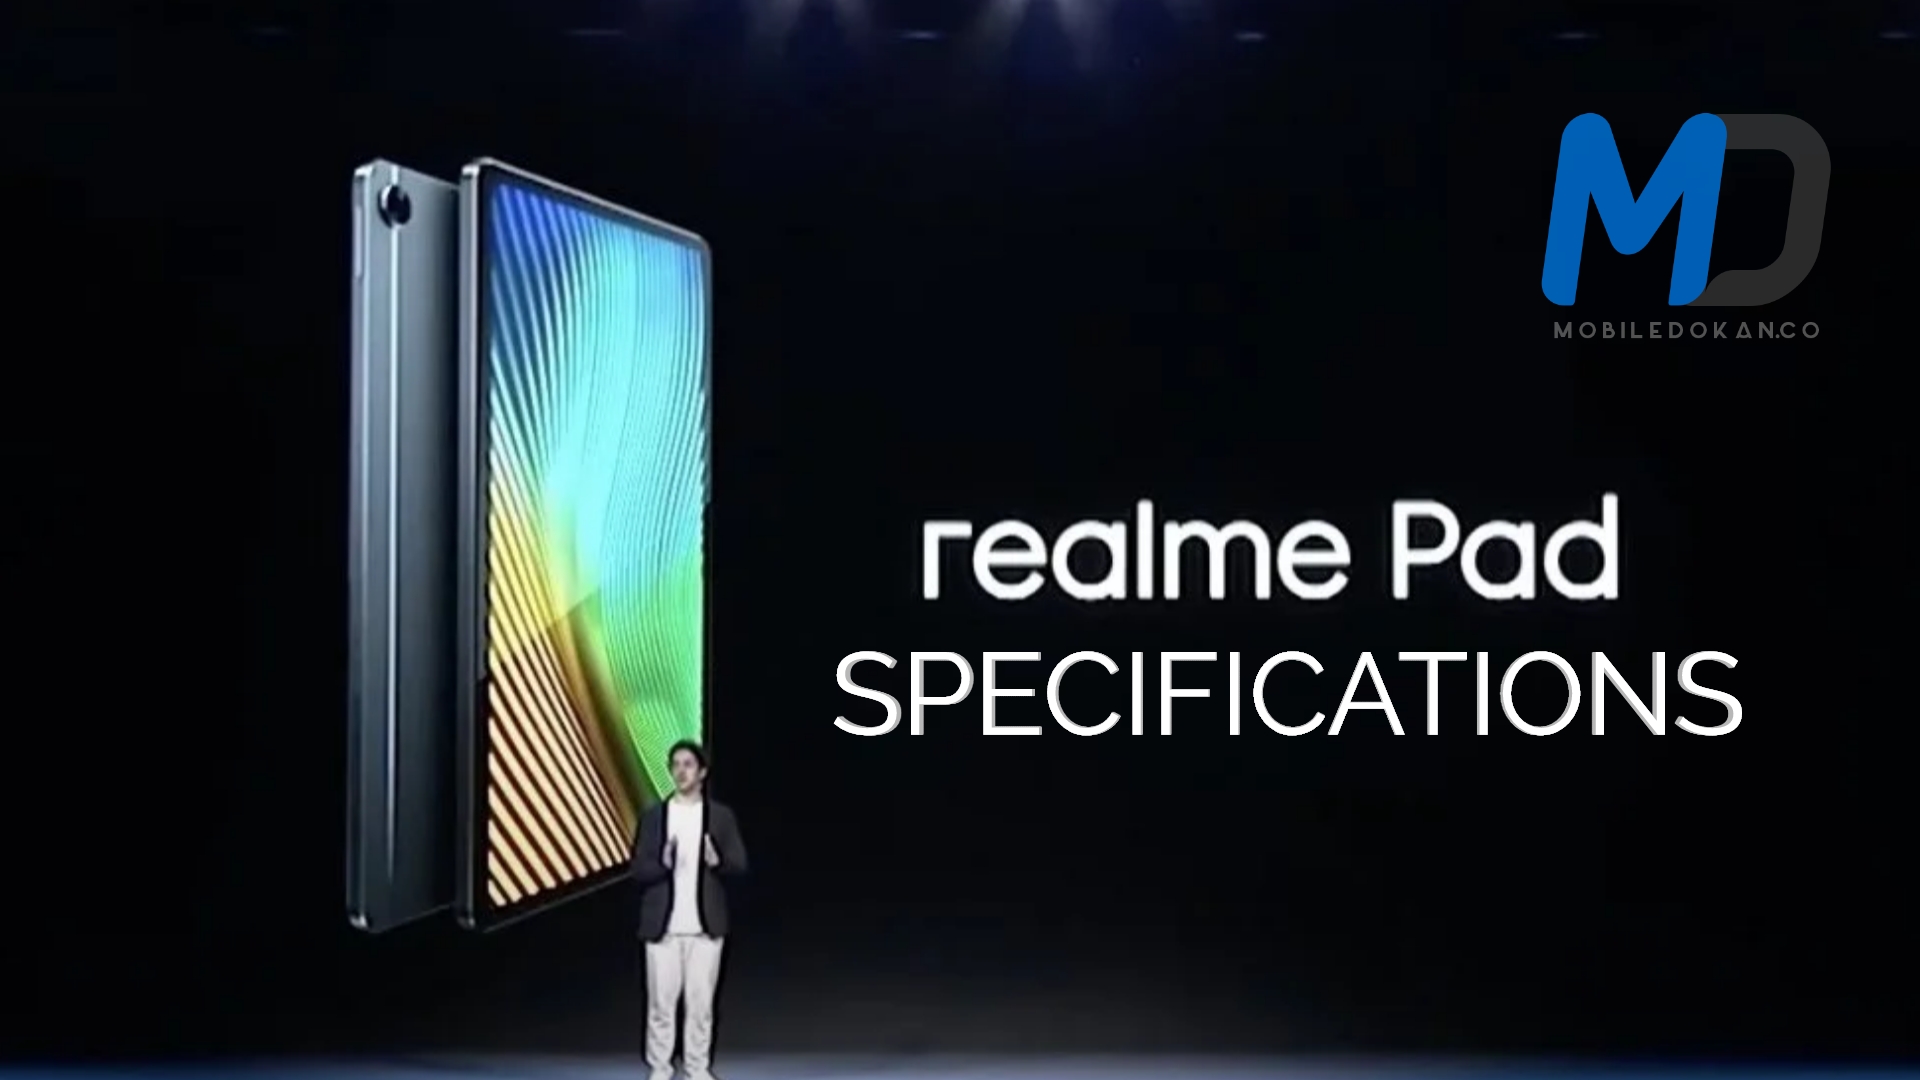 Realme Pad key specifications emerge, ahead of launch